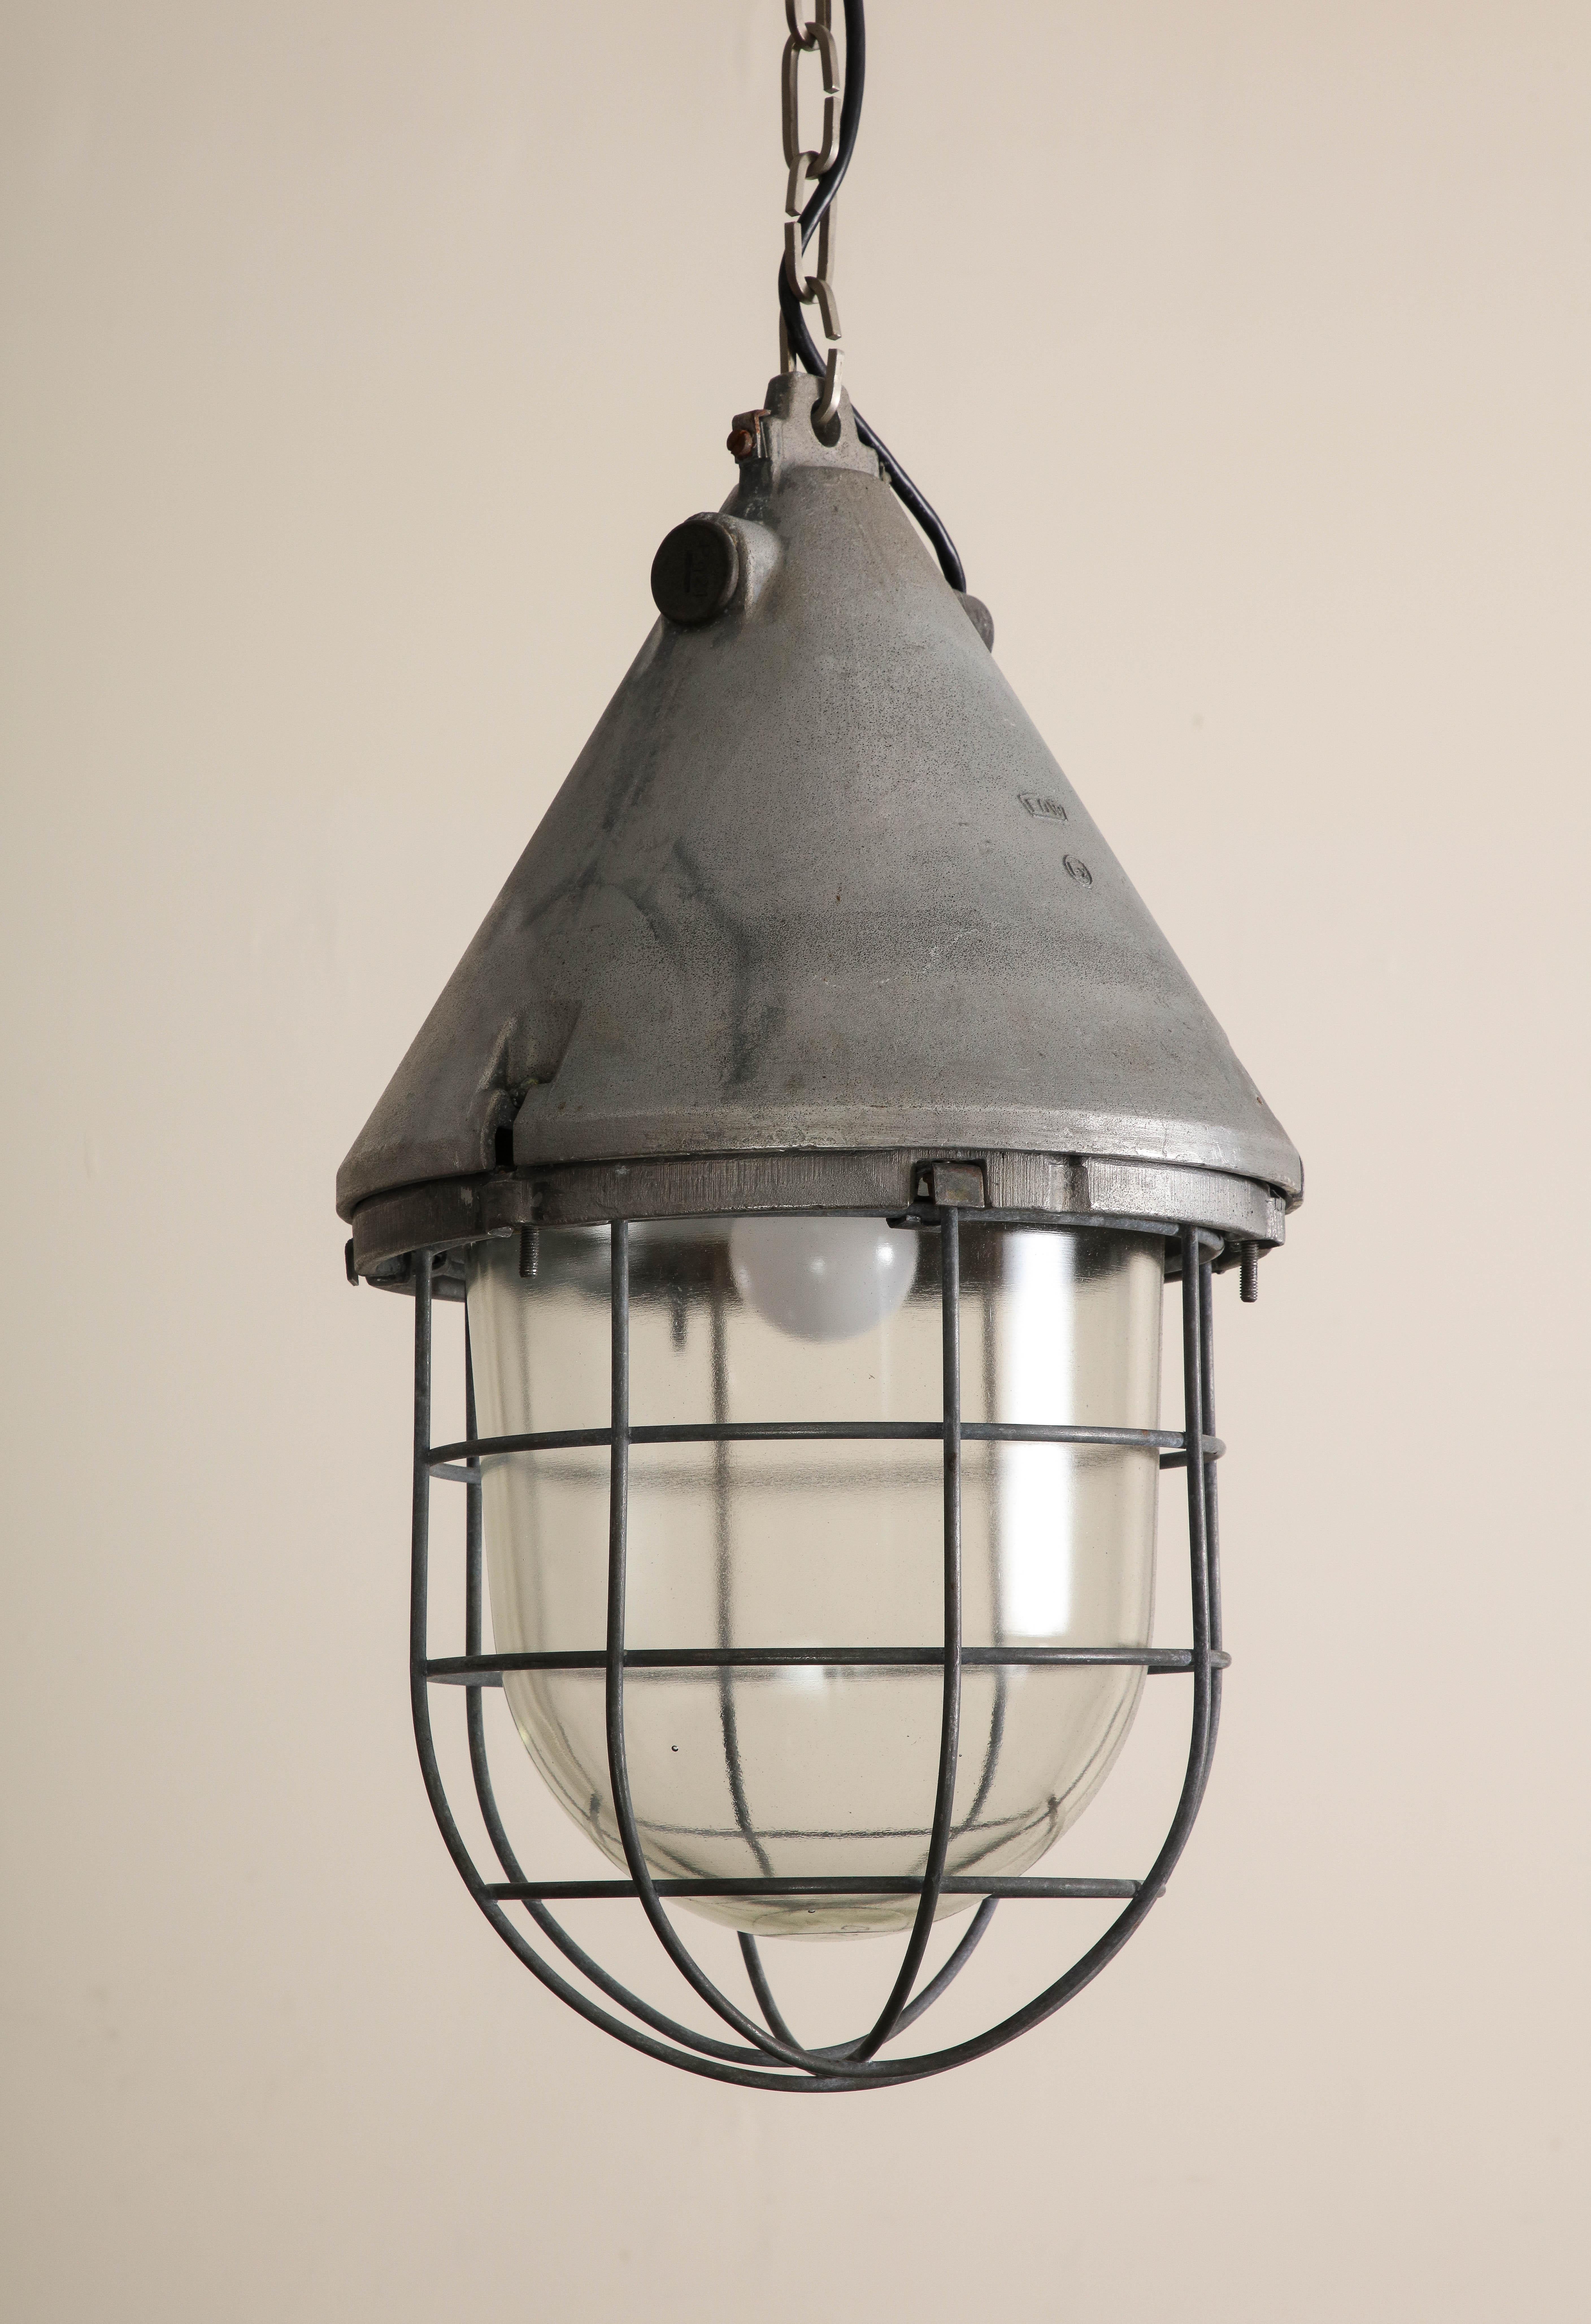 Pair of Vintage Industrial Cast Iron Cage Pendant Lights, C. 1920 For Sale 10